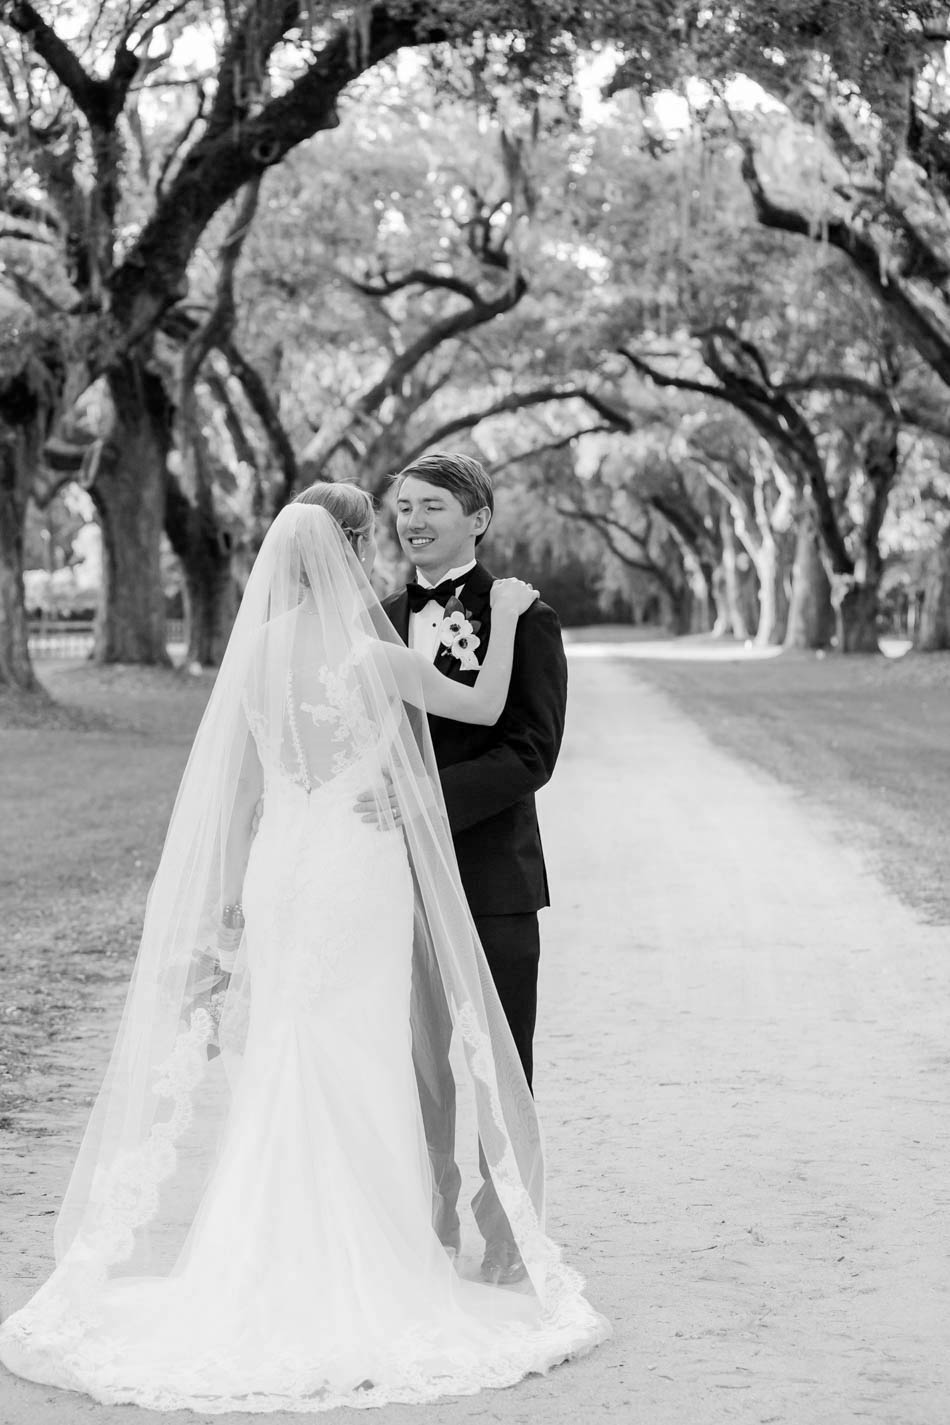 Bride and groom stand under avenue of oaks, Oakland Plantation, Mt Pleasant, South Carolina Kate Timbers Photography. http://katetimbers.com #katetimbersphotography // Charleston Photography // Inspiration